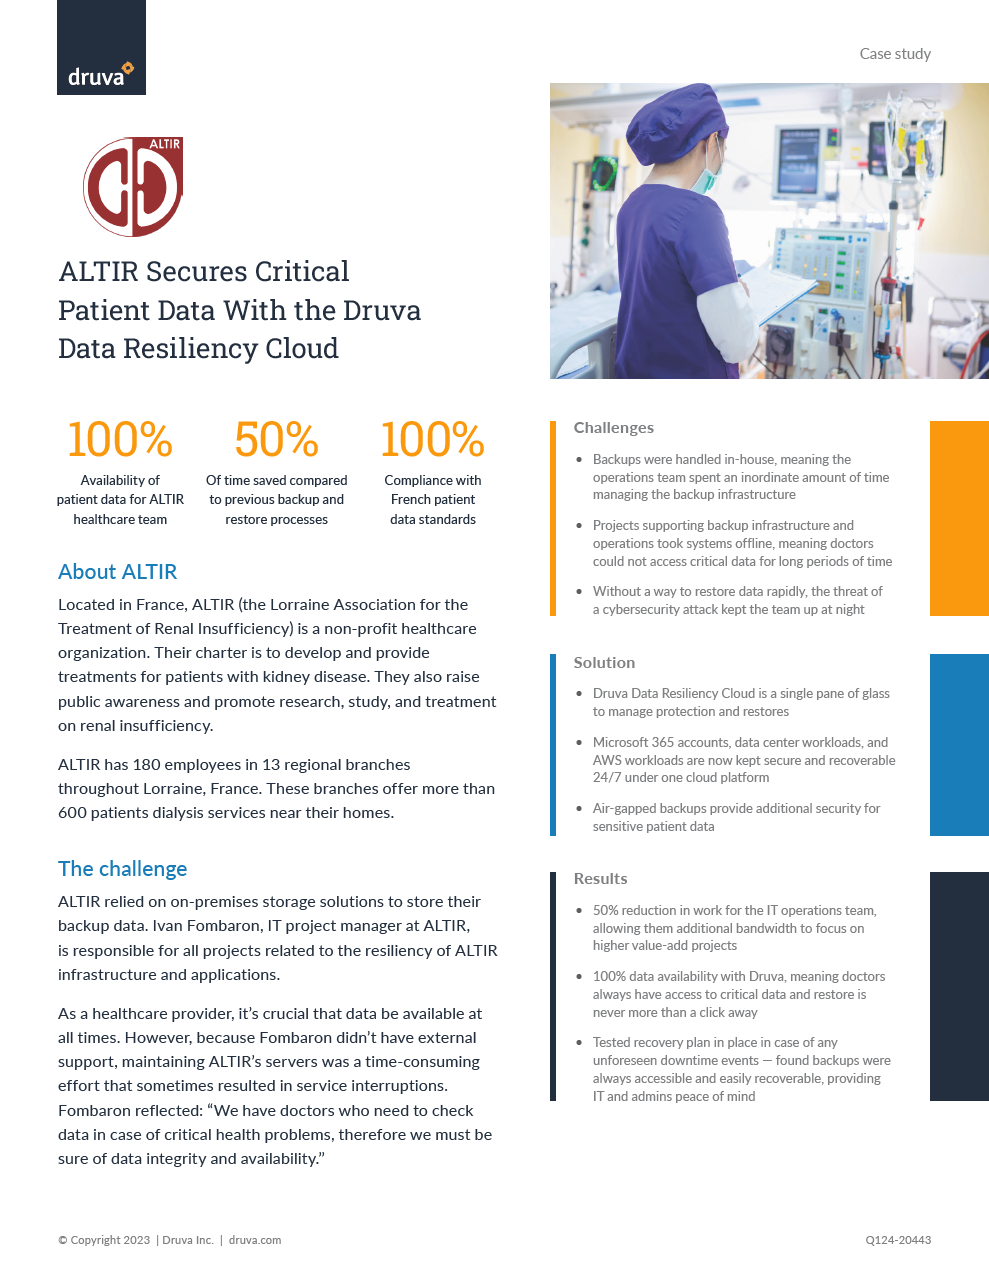 ALTIR Secures Critical Patient Data With the Druva Data Resiliency Cloud